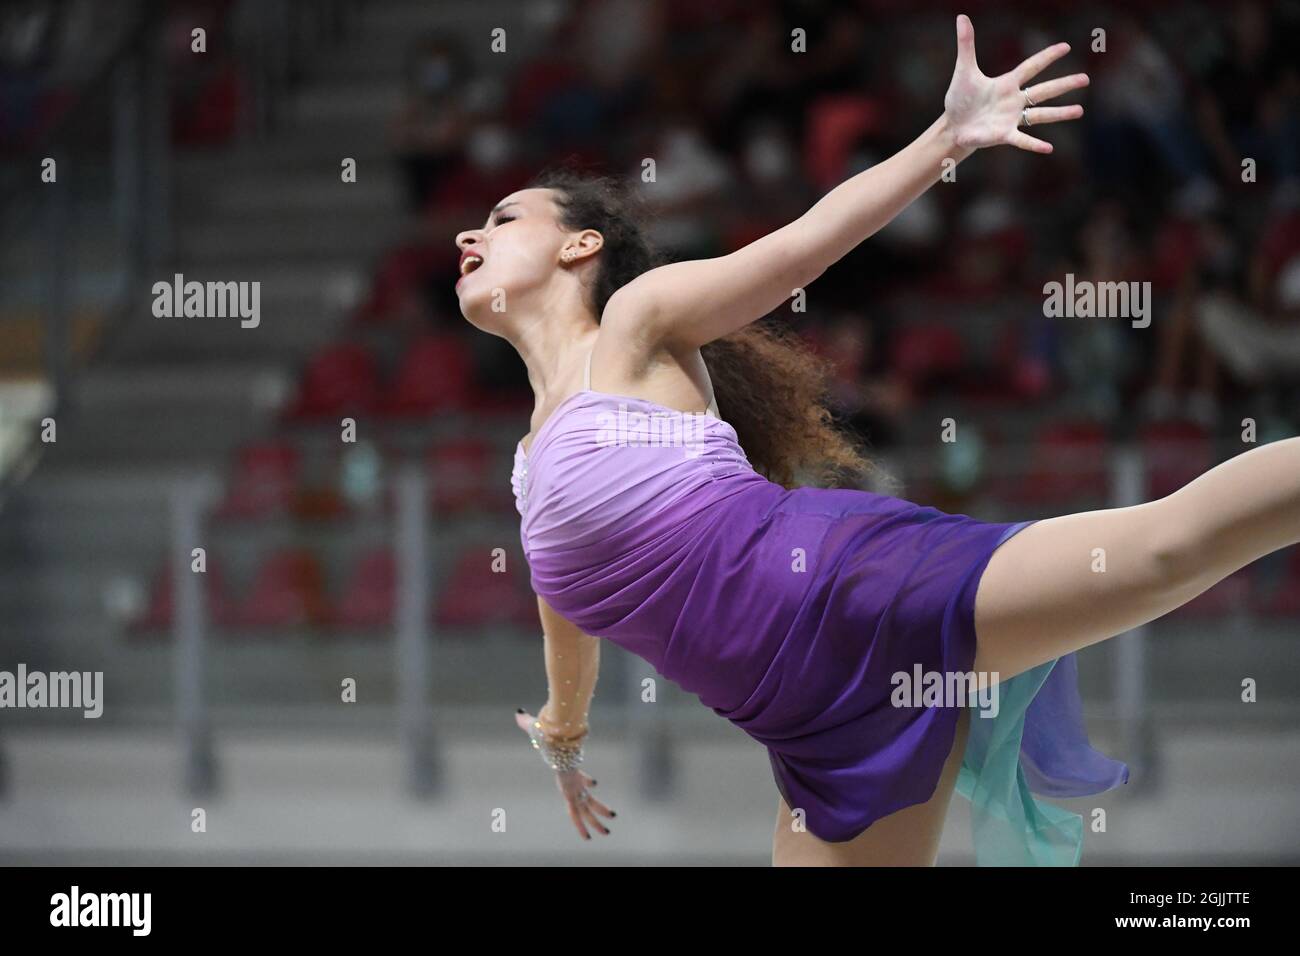 CELIA HIDOUCHE, France, performing in Senior Solo Dance - Free Dance at The European Artistic Roller Skating Championships 2021 at Play Hall, on September 07, 2021 in Riccione, Italy. (Photo by Raniero Corbelletti/AFLO) Stock Photo